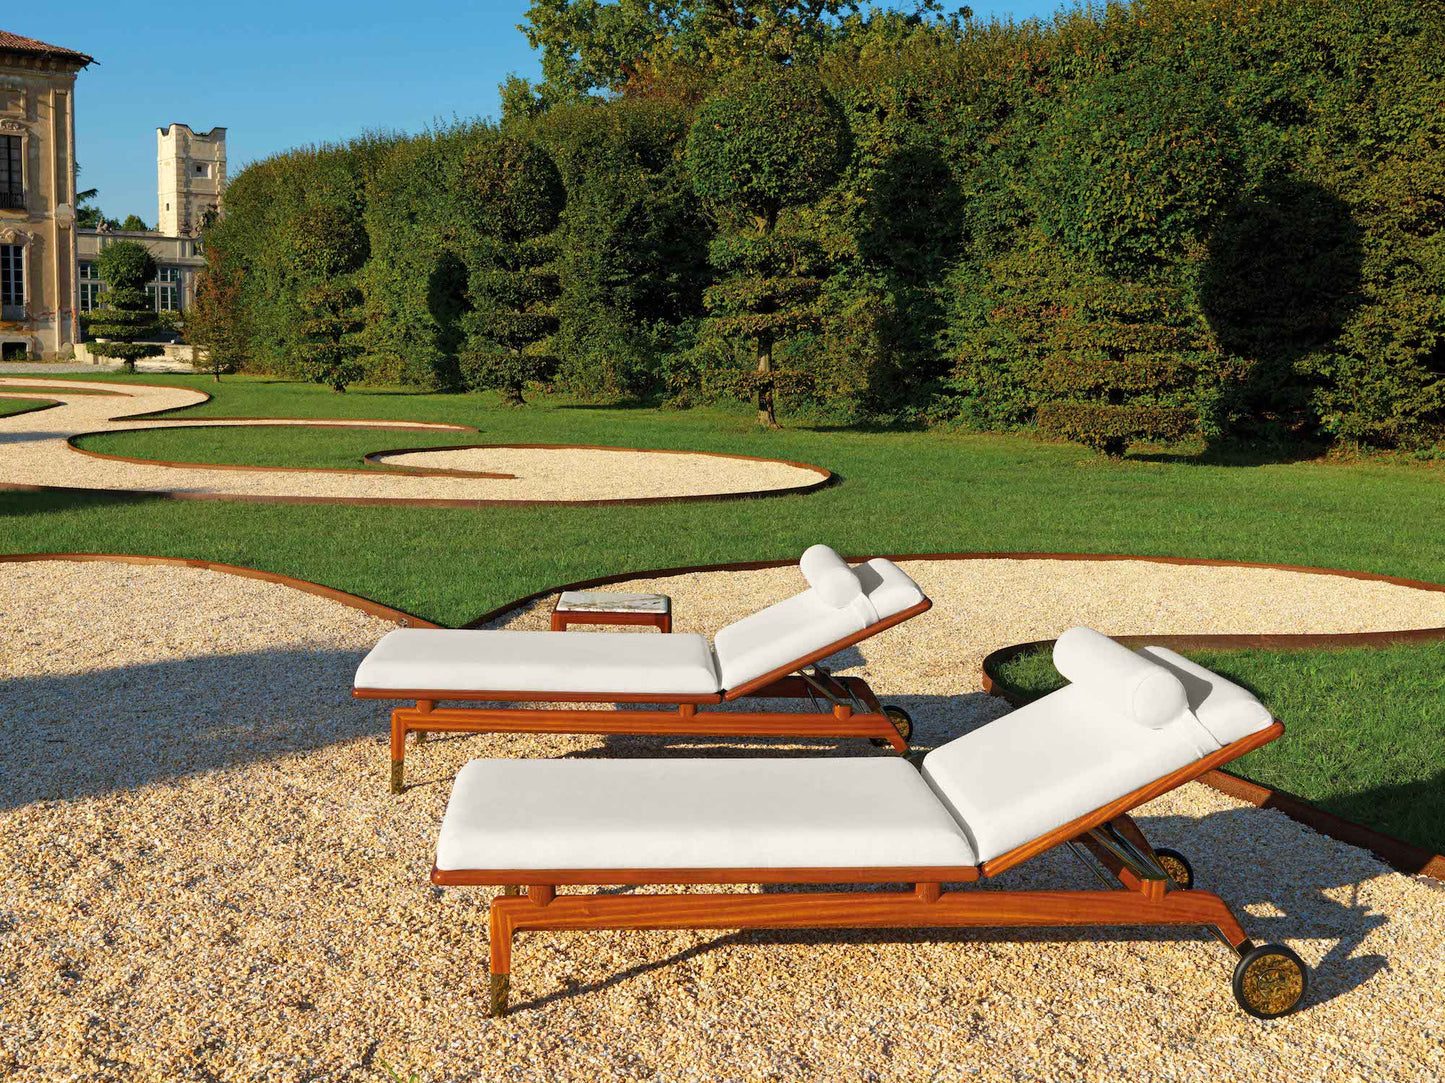 Visionnaire Outdoor Chaise Longues